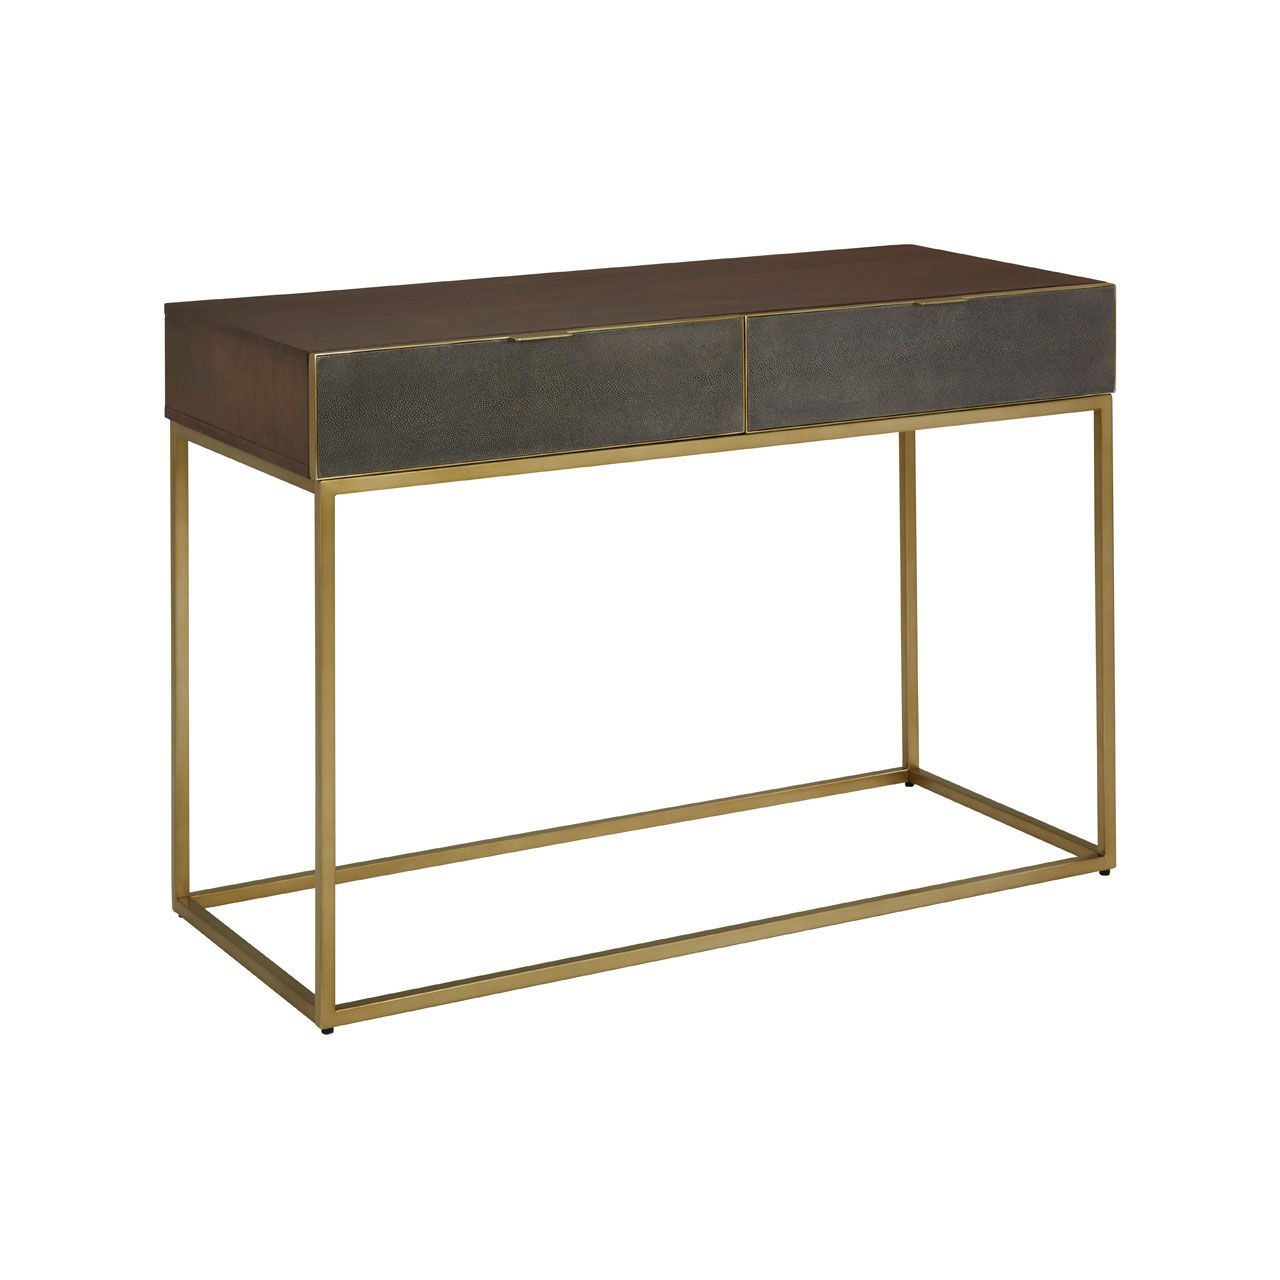 Kempton Wooden Console Table In Brown With 2 Drawers